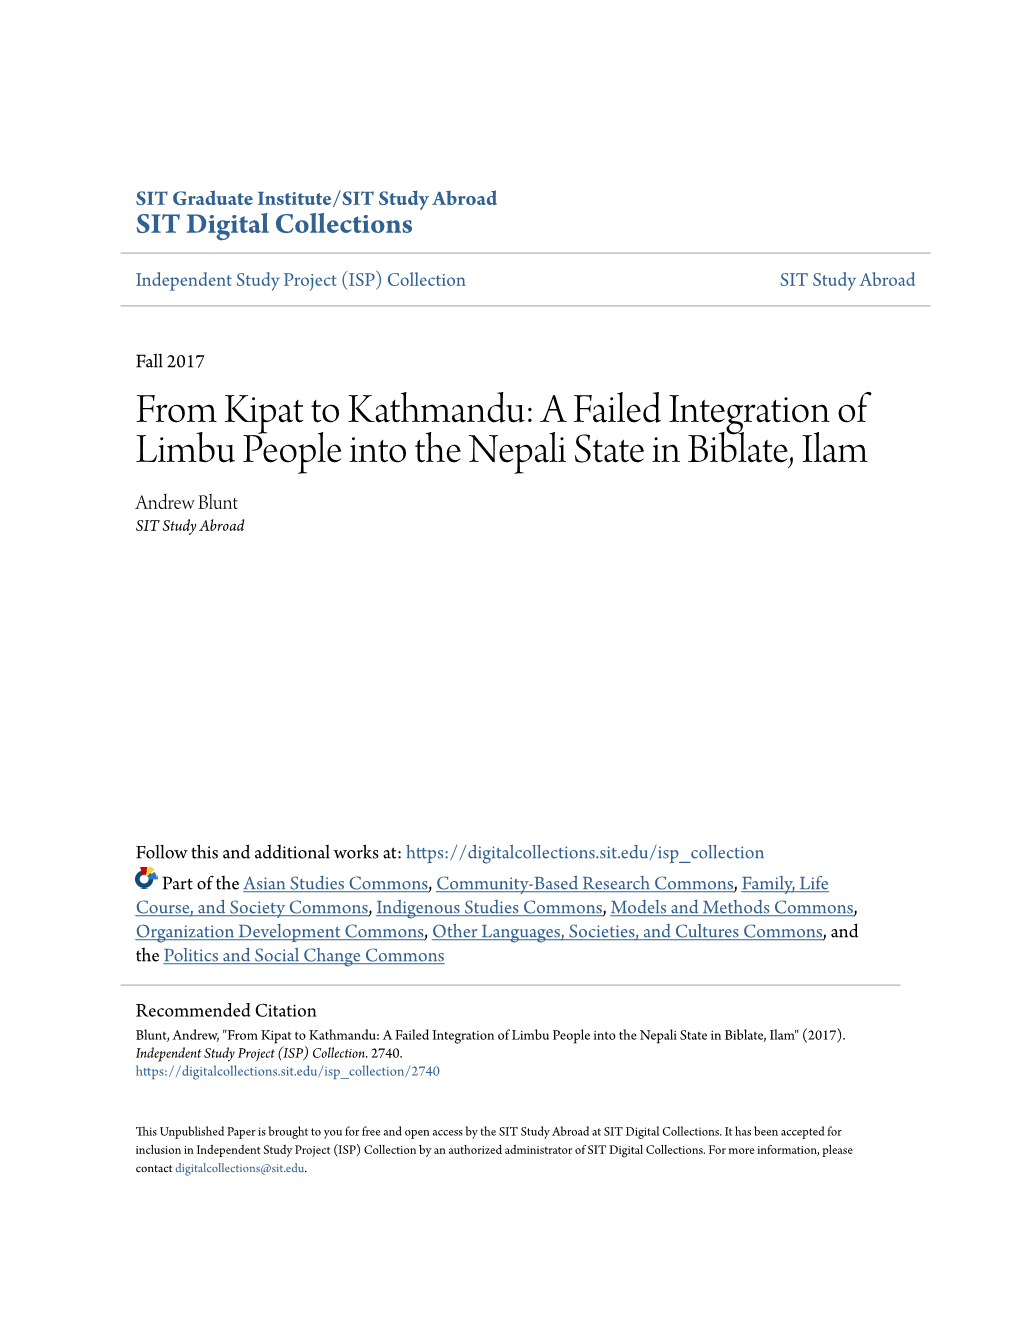 From Kipat to Kathmandu: a Failed Integration of Limbu People Into the Nepali State in Biblate, Ilam Andrew Blunt SIT Study Abroad